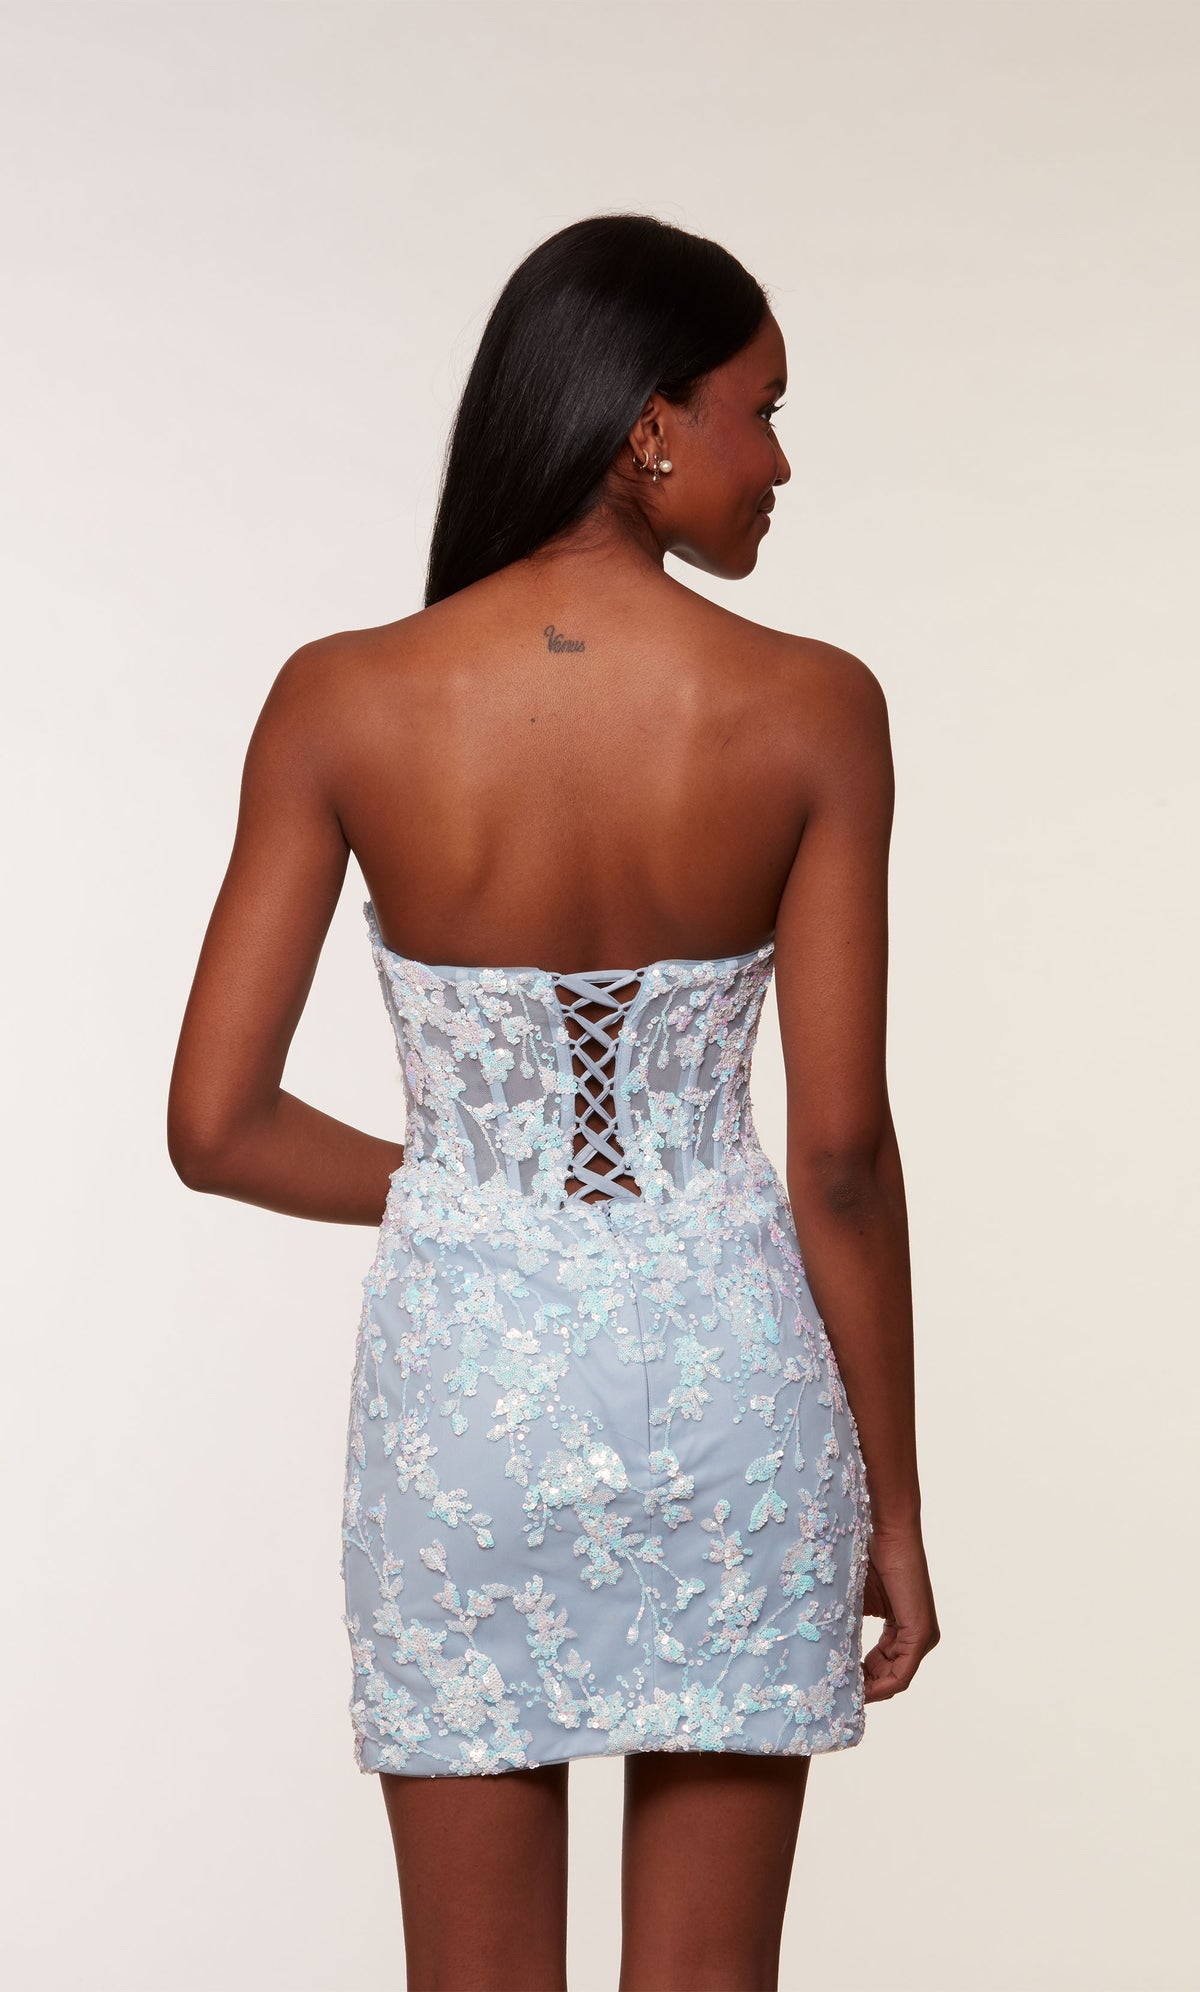 An opal-ice blue, strapless corset dress with a sheer bodice, lace-up back, and floral sequin detail.